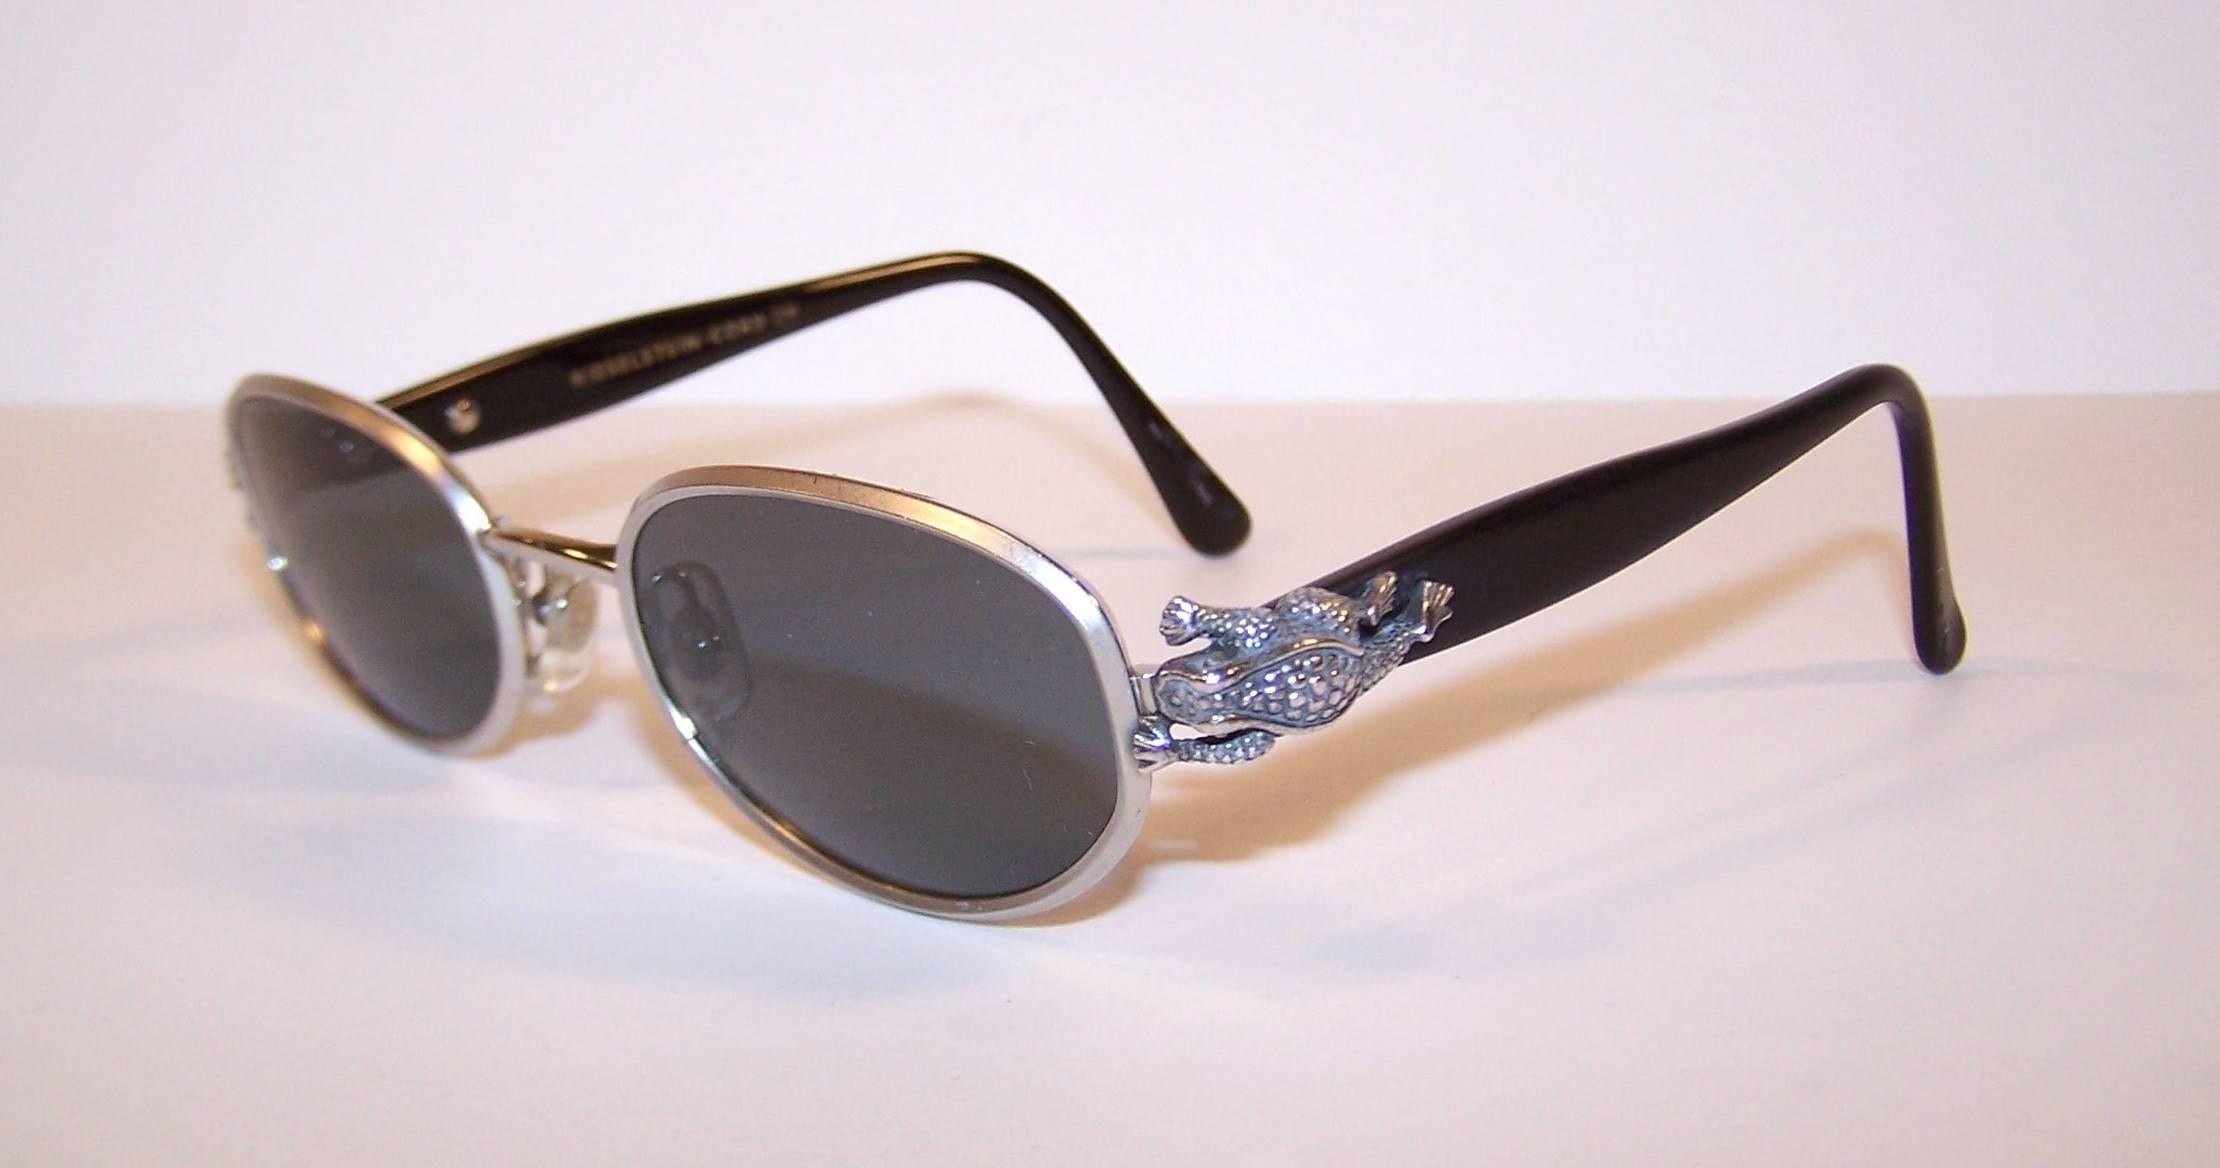 Sunglasses?...Sculpture?...Jewelry?  How about all three!  Barry Kieselstein-Cord describes himself as an artist and refers to his work as sculpture.  These sterling silver frog embellished sunglasses are great evidence to support that